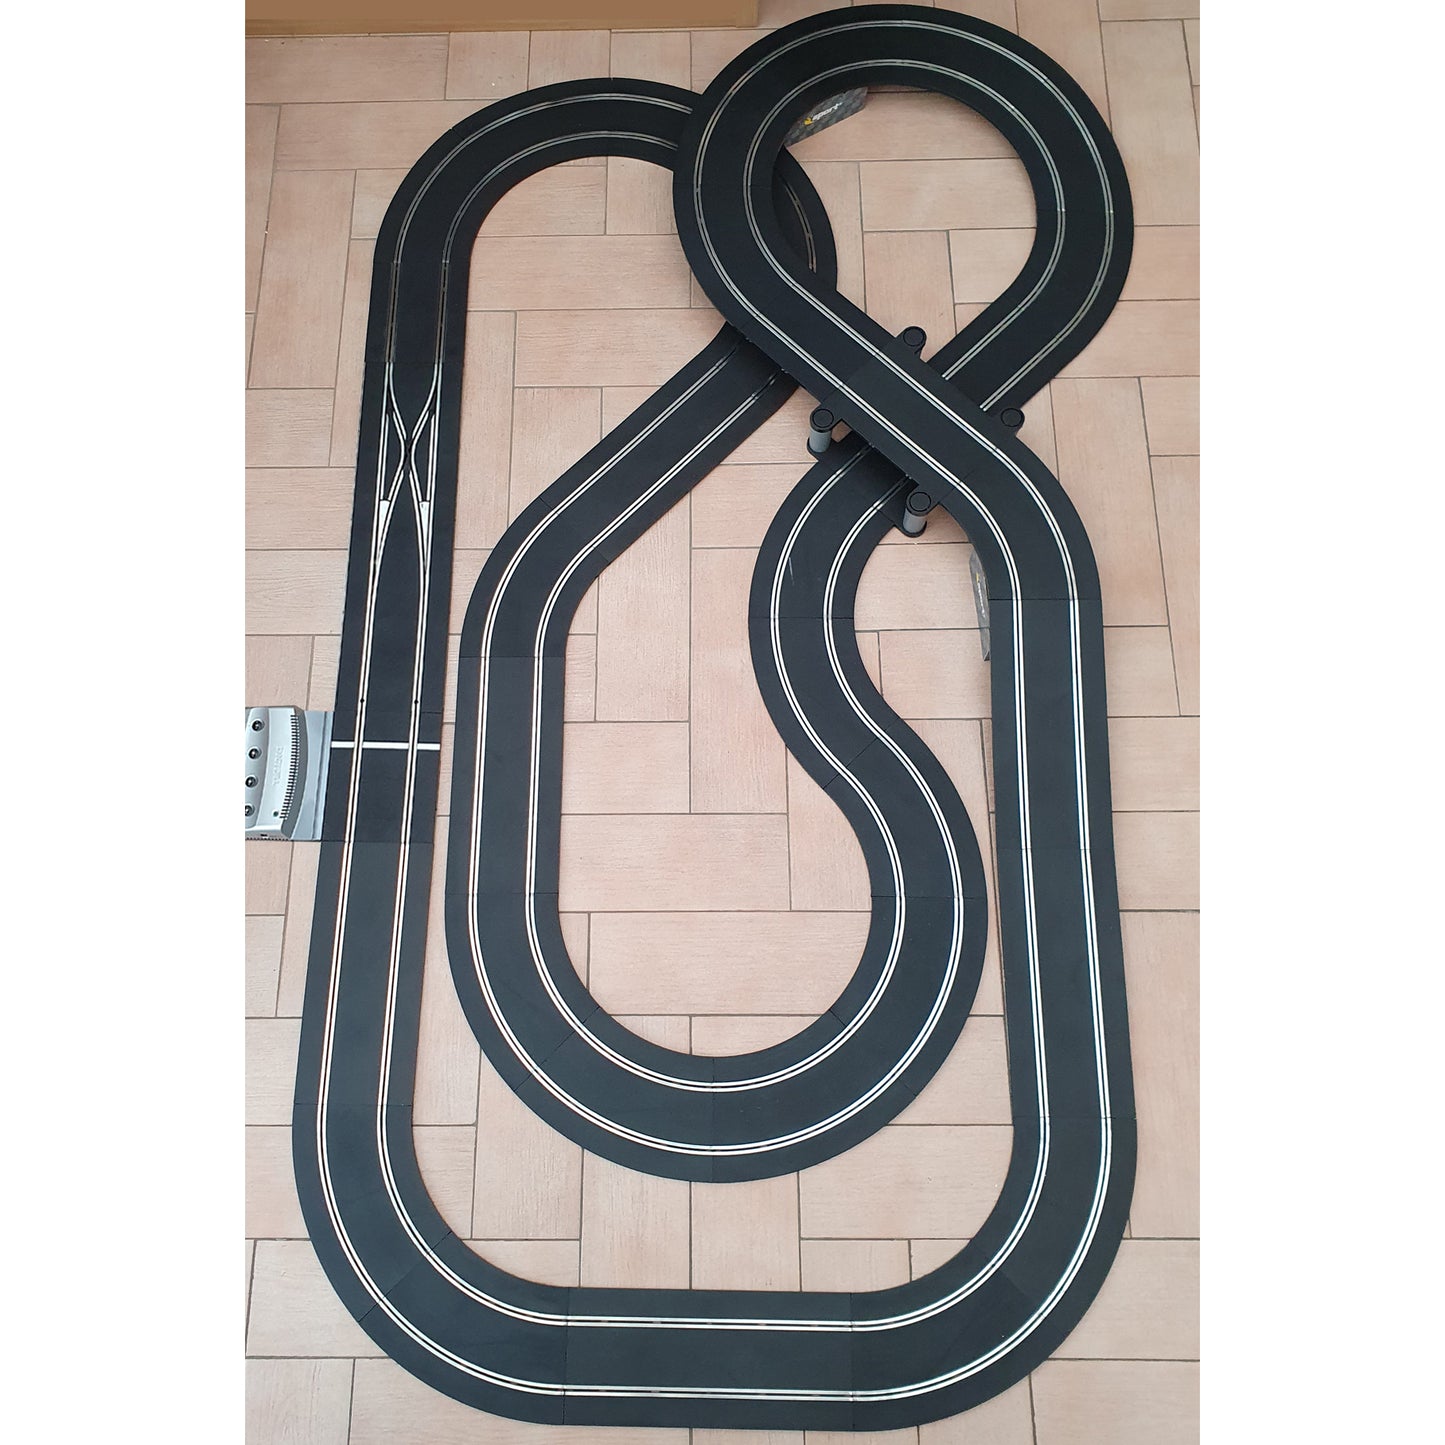 Scalextric Sport 1:32 Track Set - Layout With Bridge - Digital #AS9